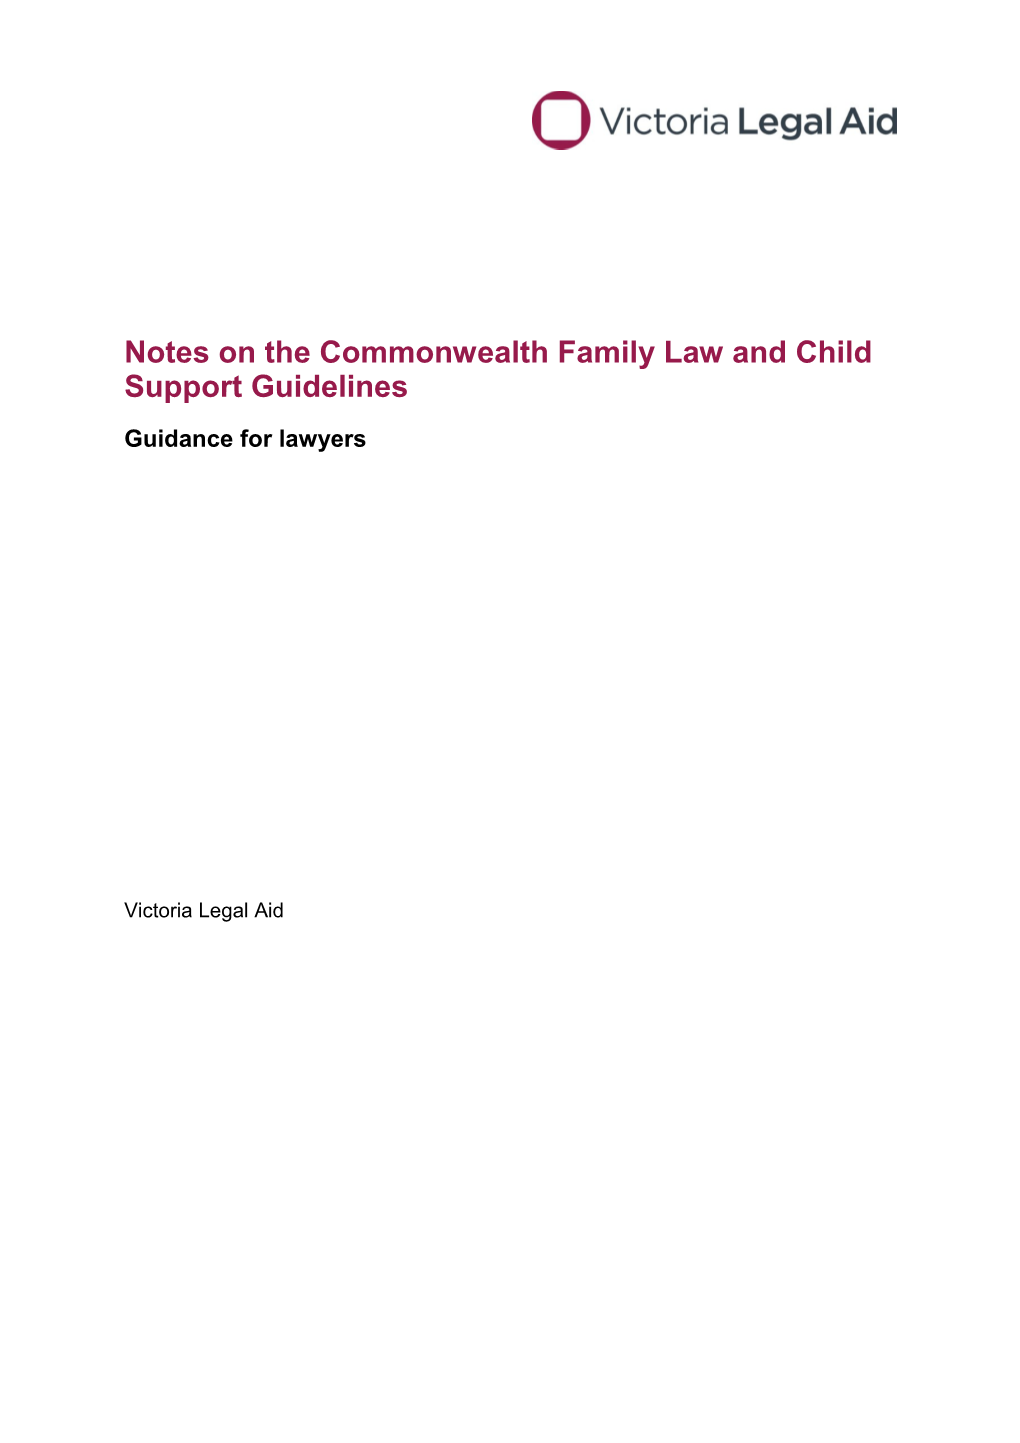 Notes on the Commonwealth Family Law and Child Support Guidelines